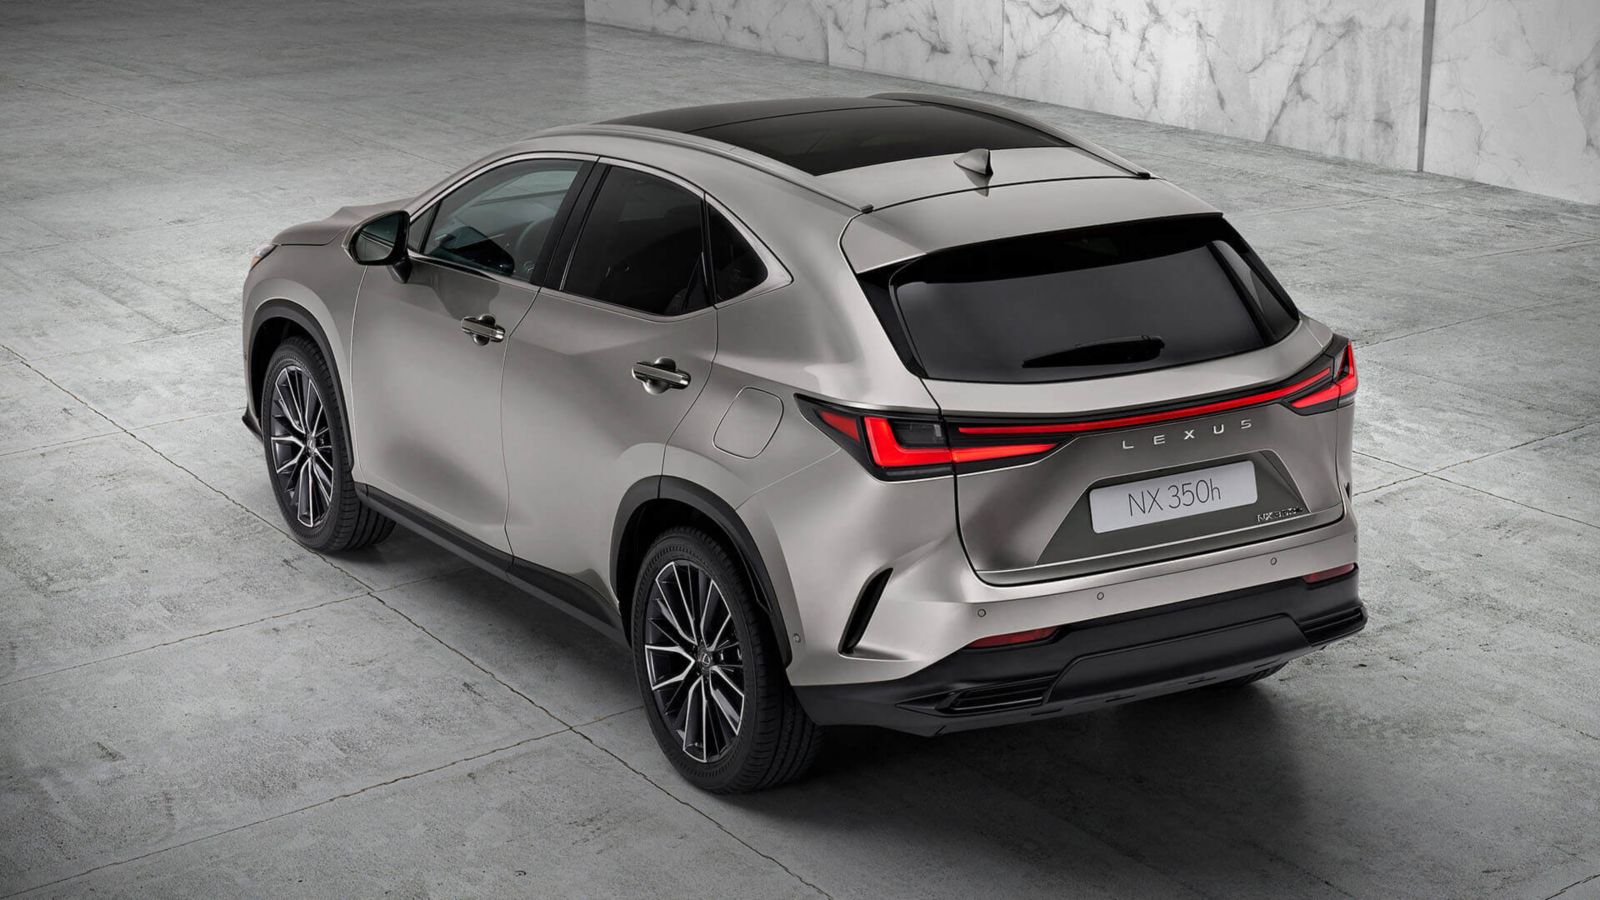 Rear view of the Lexus NX 350h 